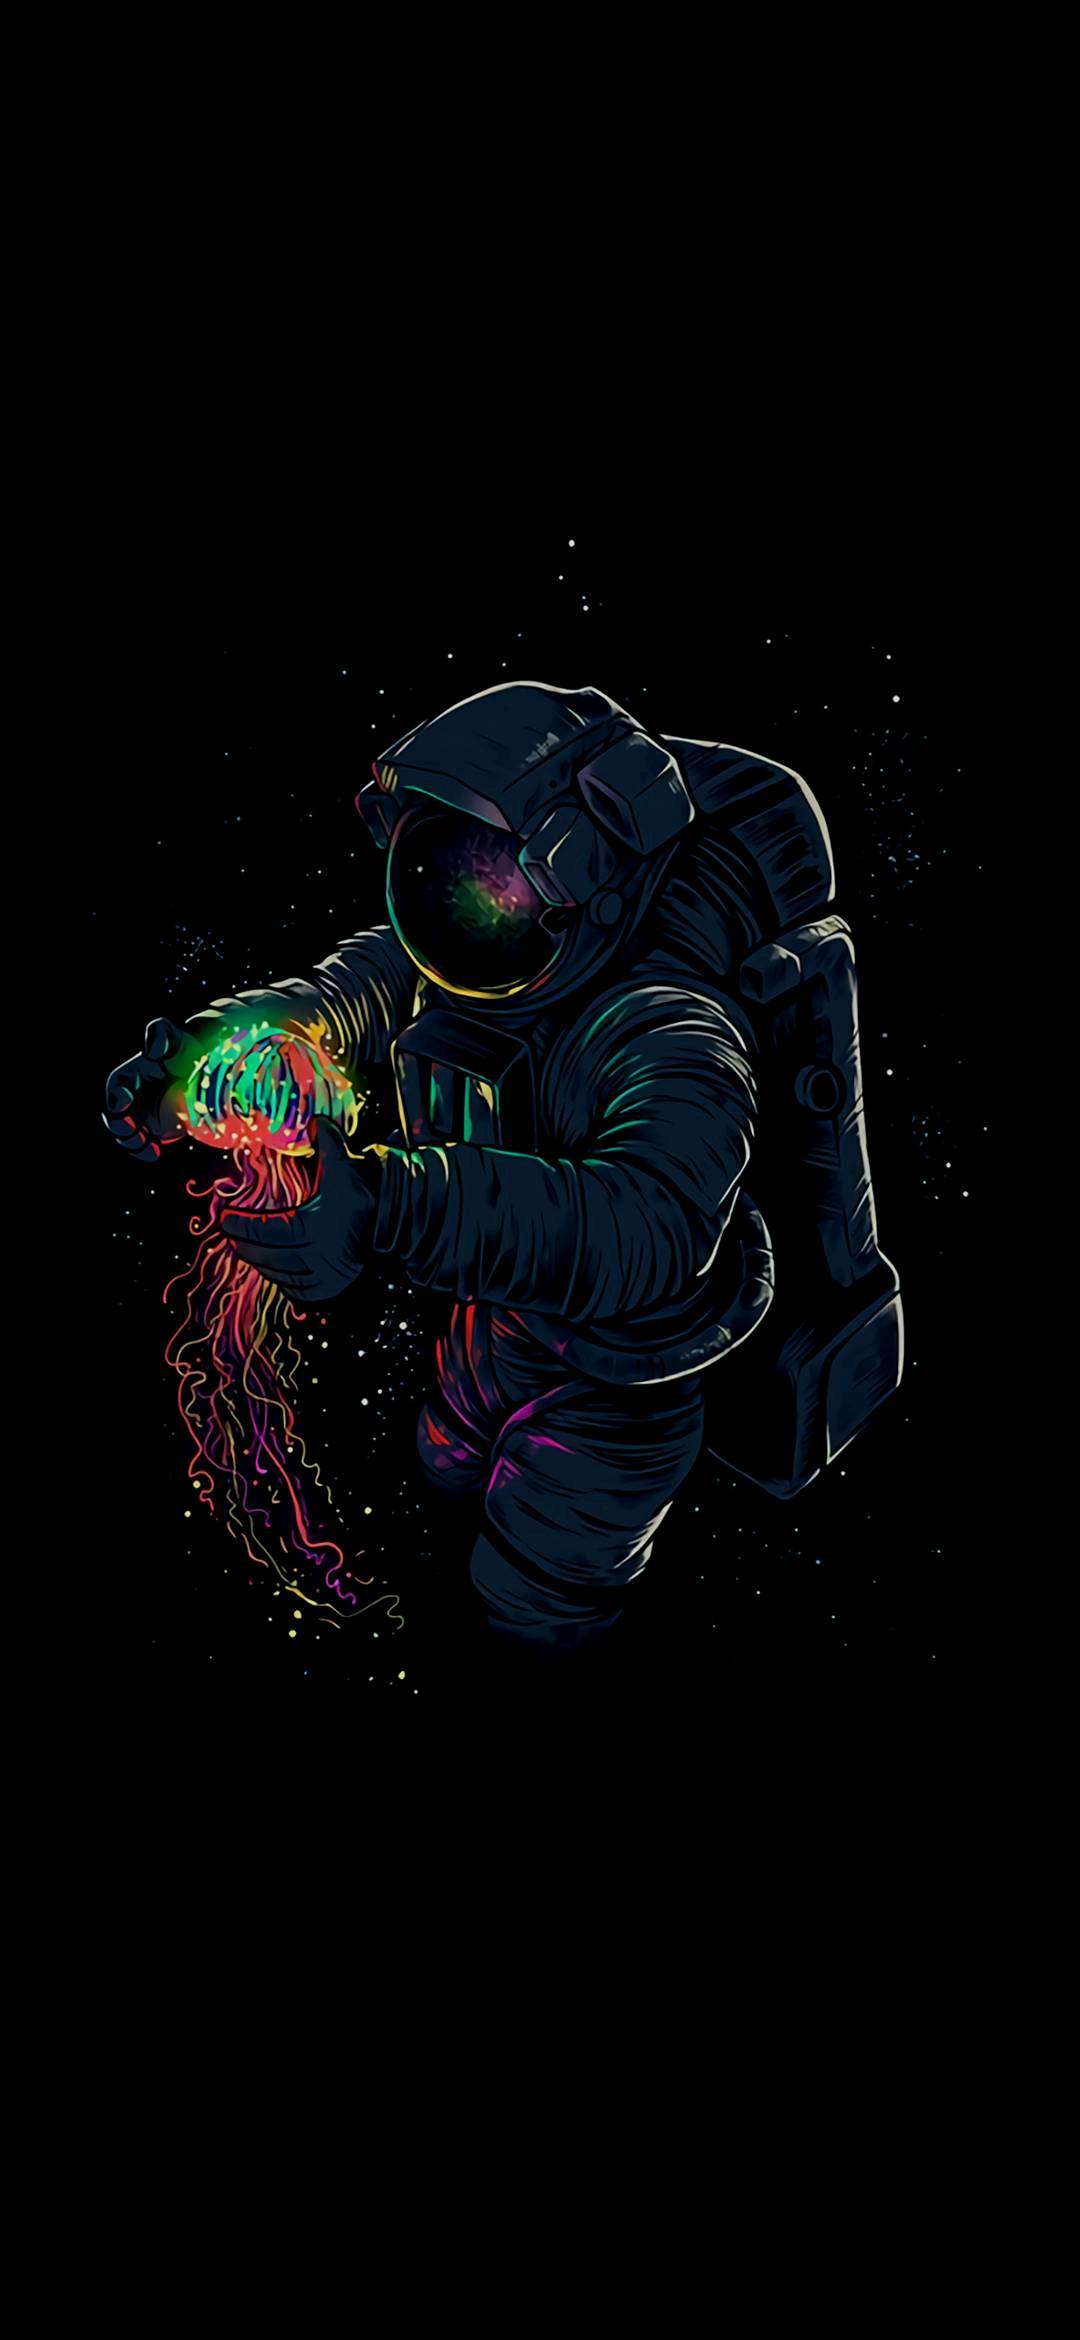 Best amoled wallpaper to save battery